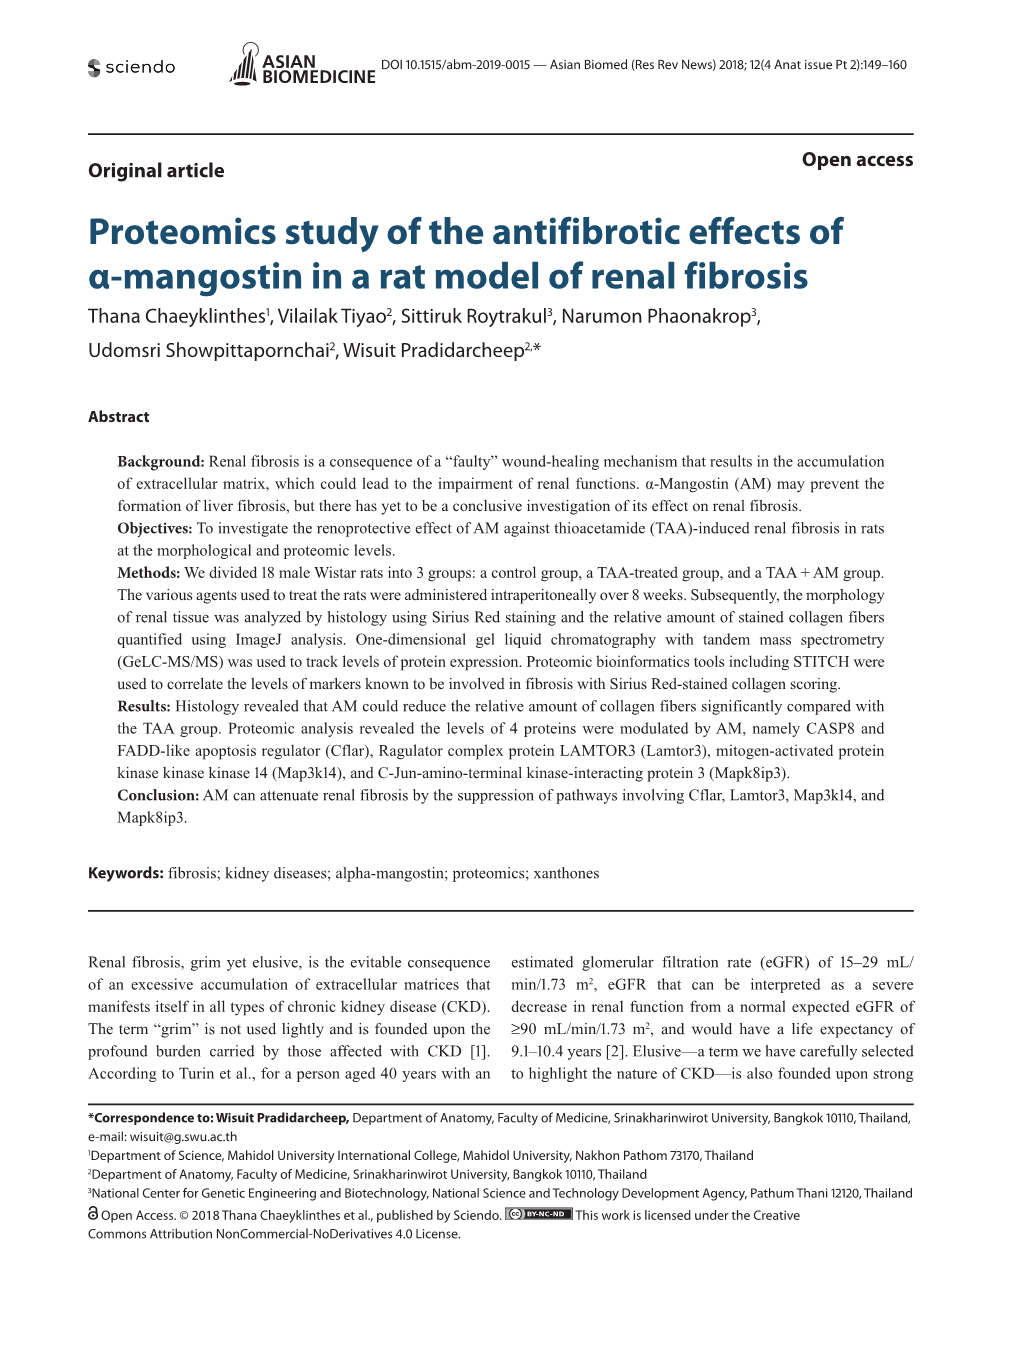 Proteomics Study of the Antifibrotic Effects of Α-Mangostin in a Rat